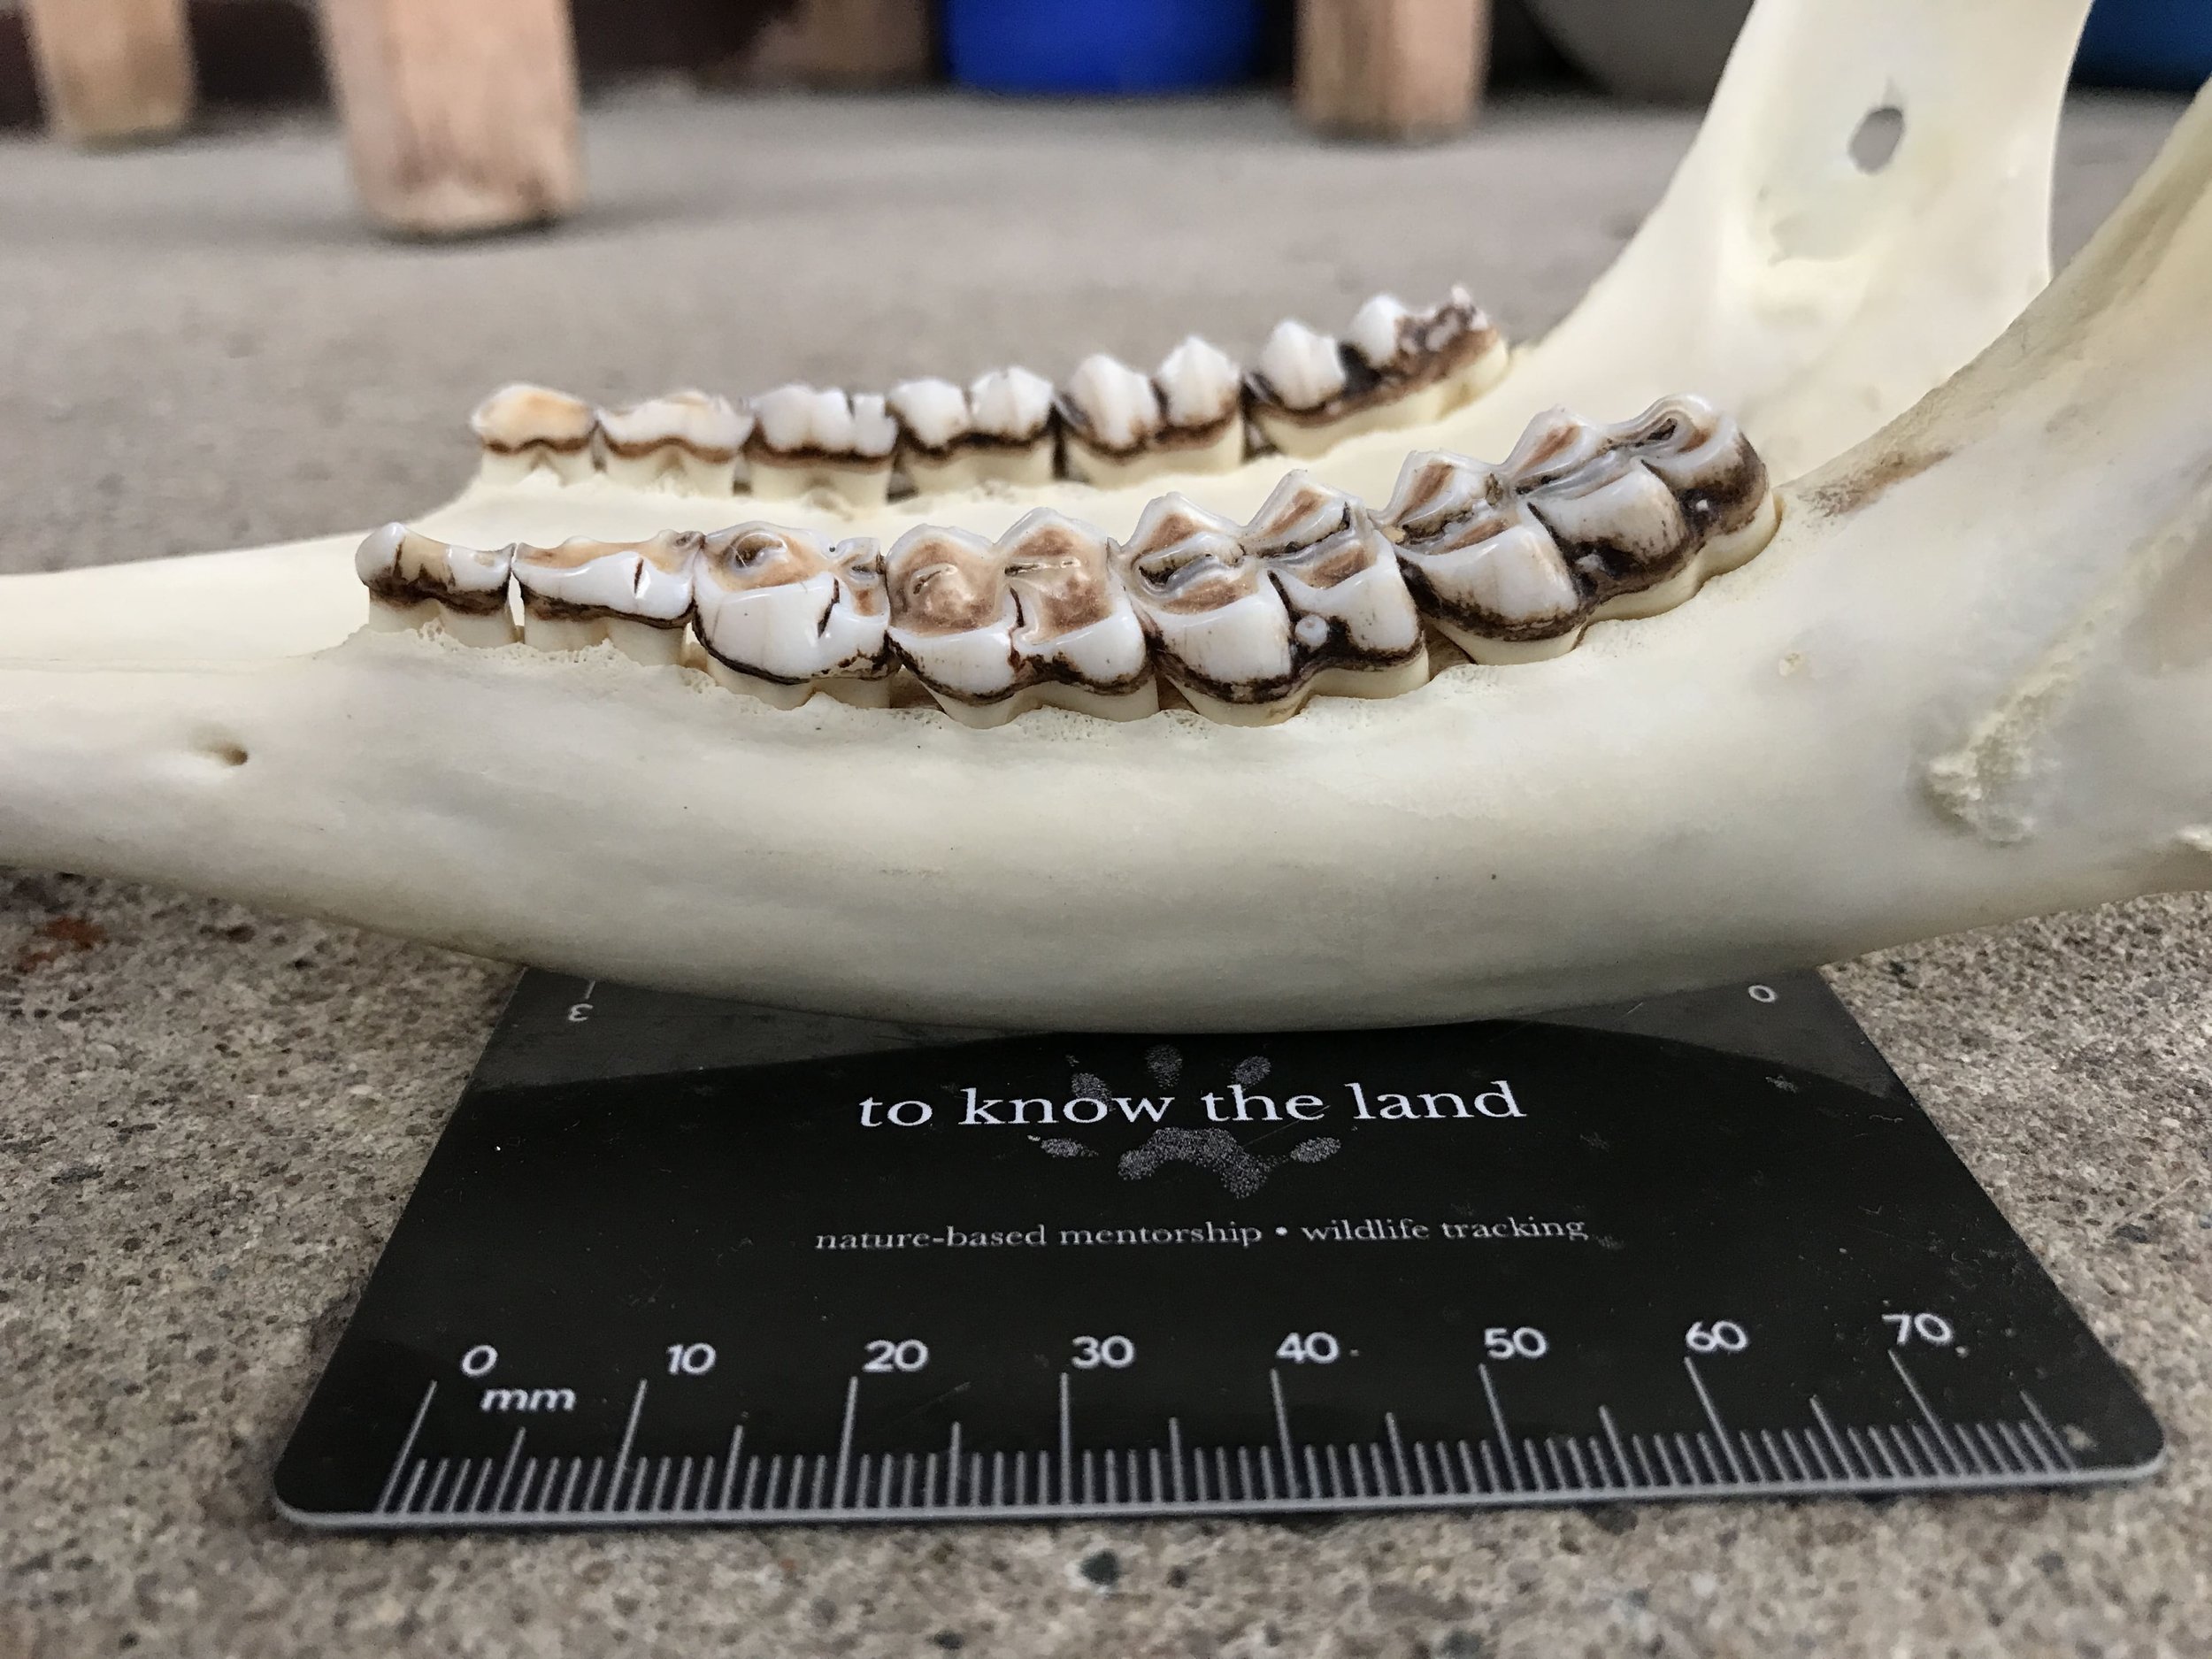 Adult White-tailed Deer mandible closer up